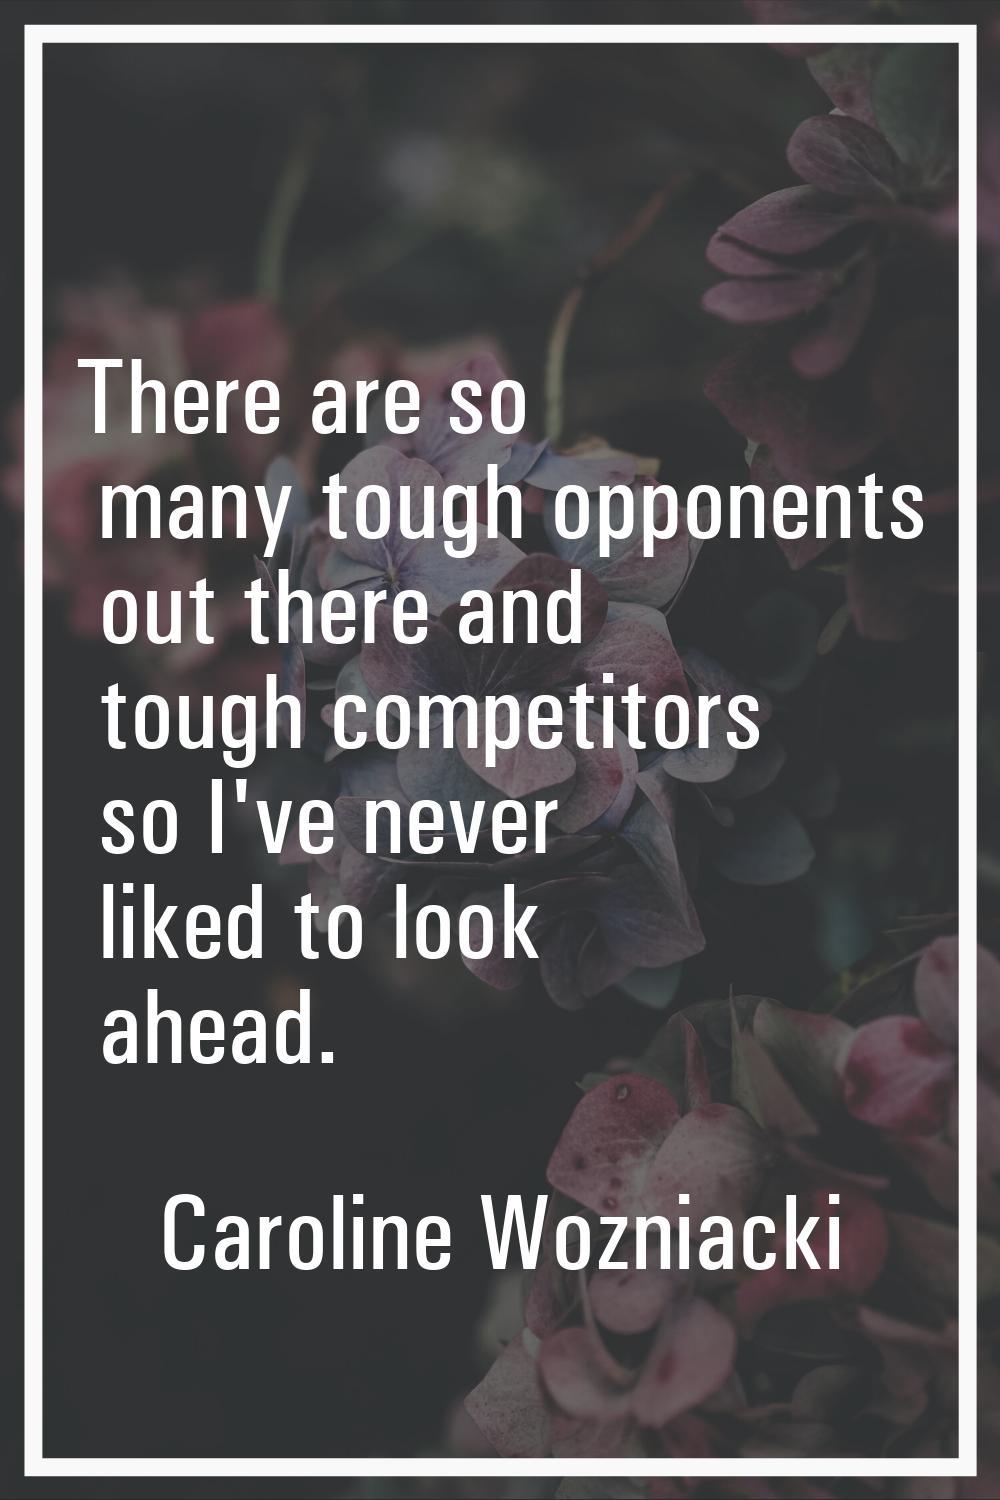 There are so many tough opponents out there and tough competitors so I've never liked to look ahead